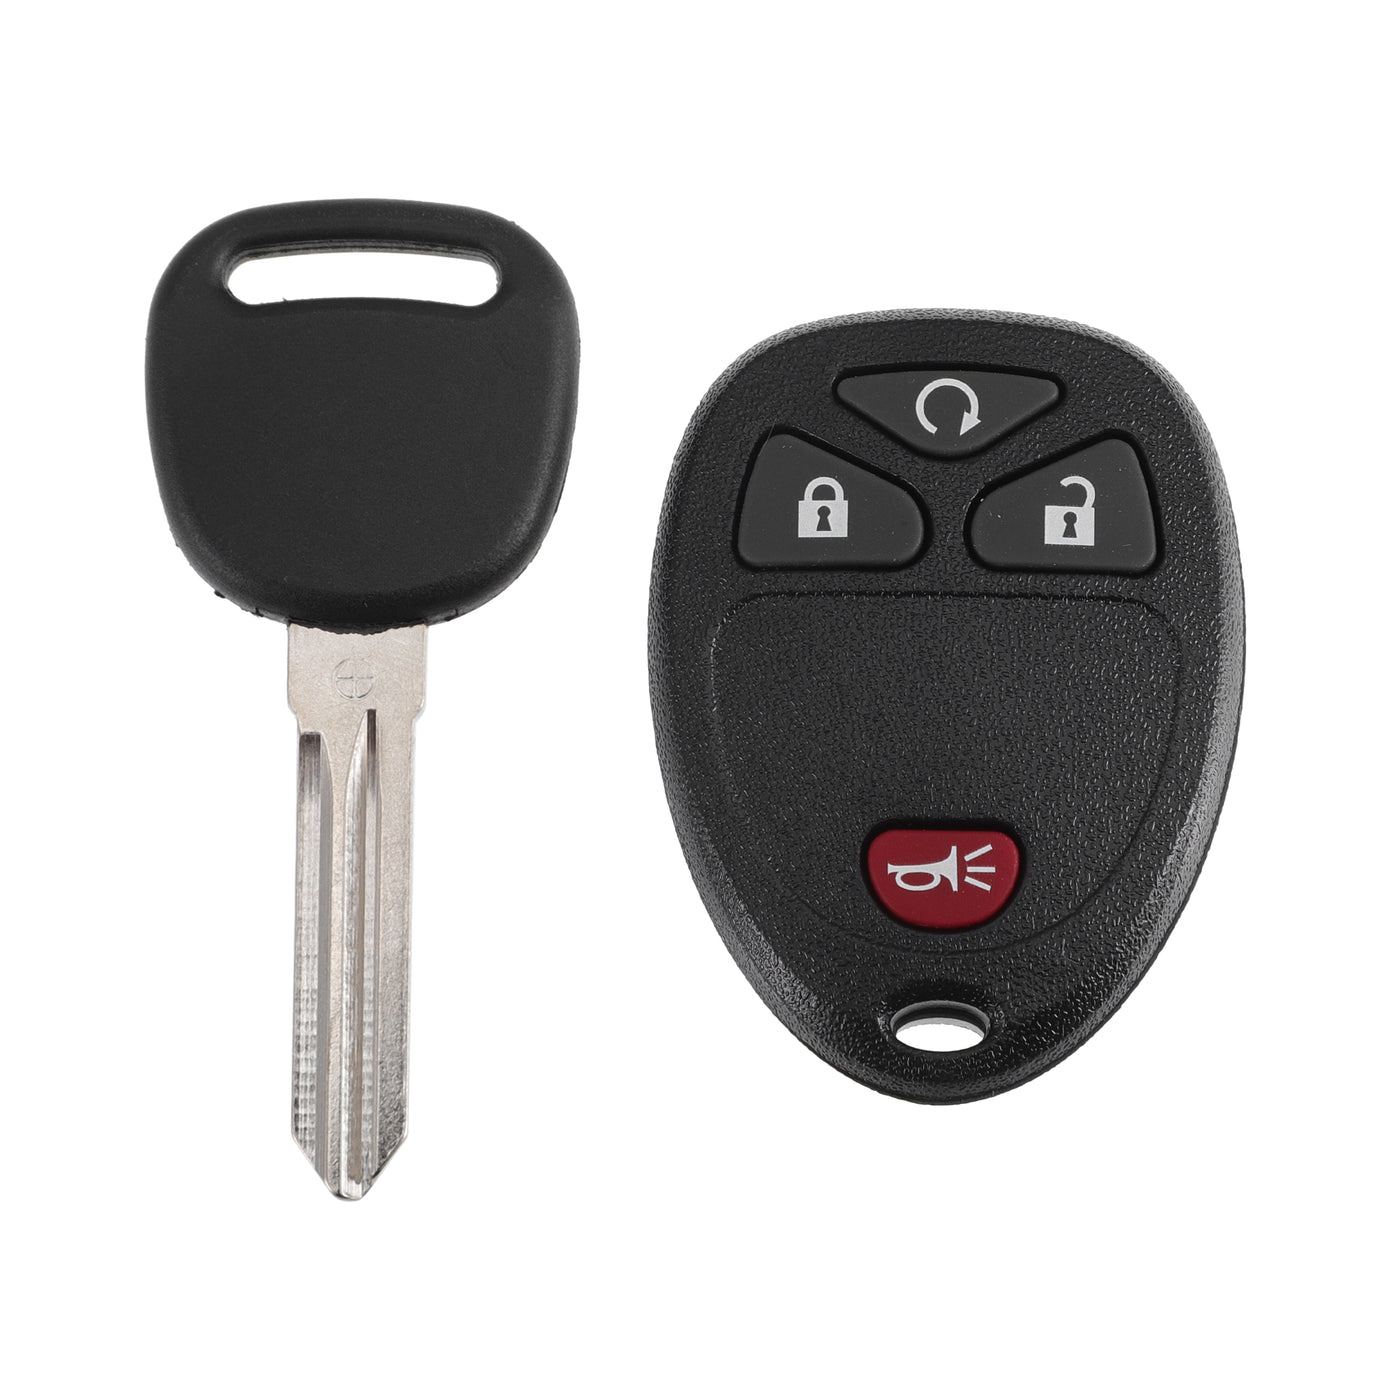 X AUTOHAUX OUC60270 315MHz Replacement Keyless Entry Remote Ignition Transponder Key Fob for Chevrolet Silverado 1500 2500 3500 2007-2013 for GMC Sierra 1500 2500 3500 2008-2014 4 Buttons